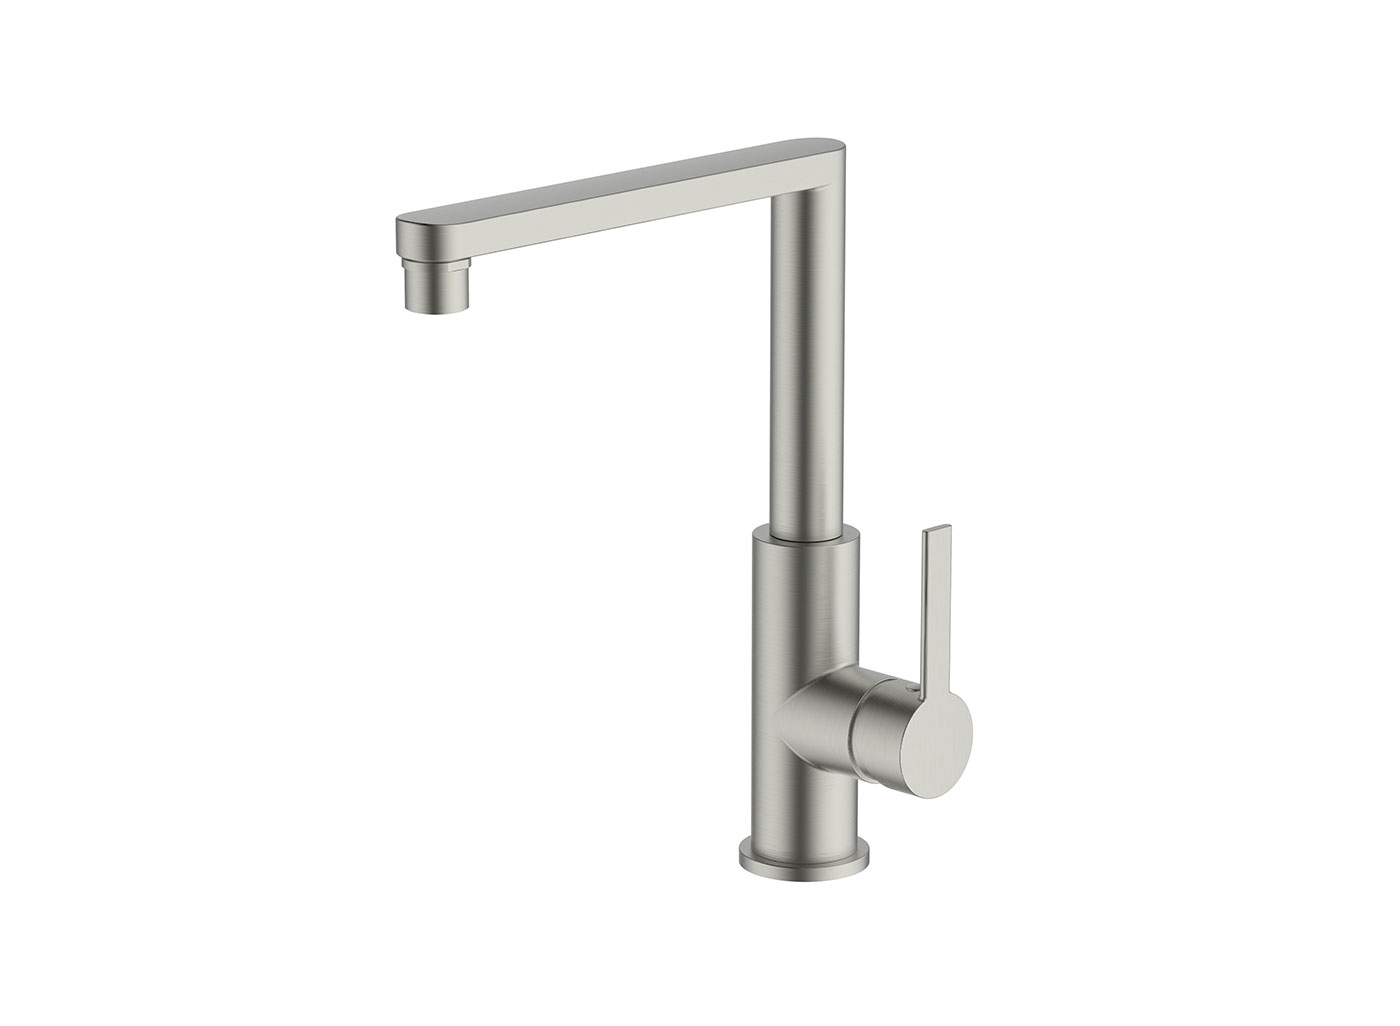 Introducing Greens Optima - an exclusive range of bathroom and kitchen mixers & showers. Inspired by the timeless pin-lever design the Optima products are guaranteed to elevate any room with its refined appearance.